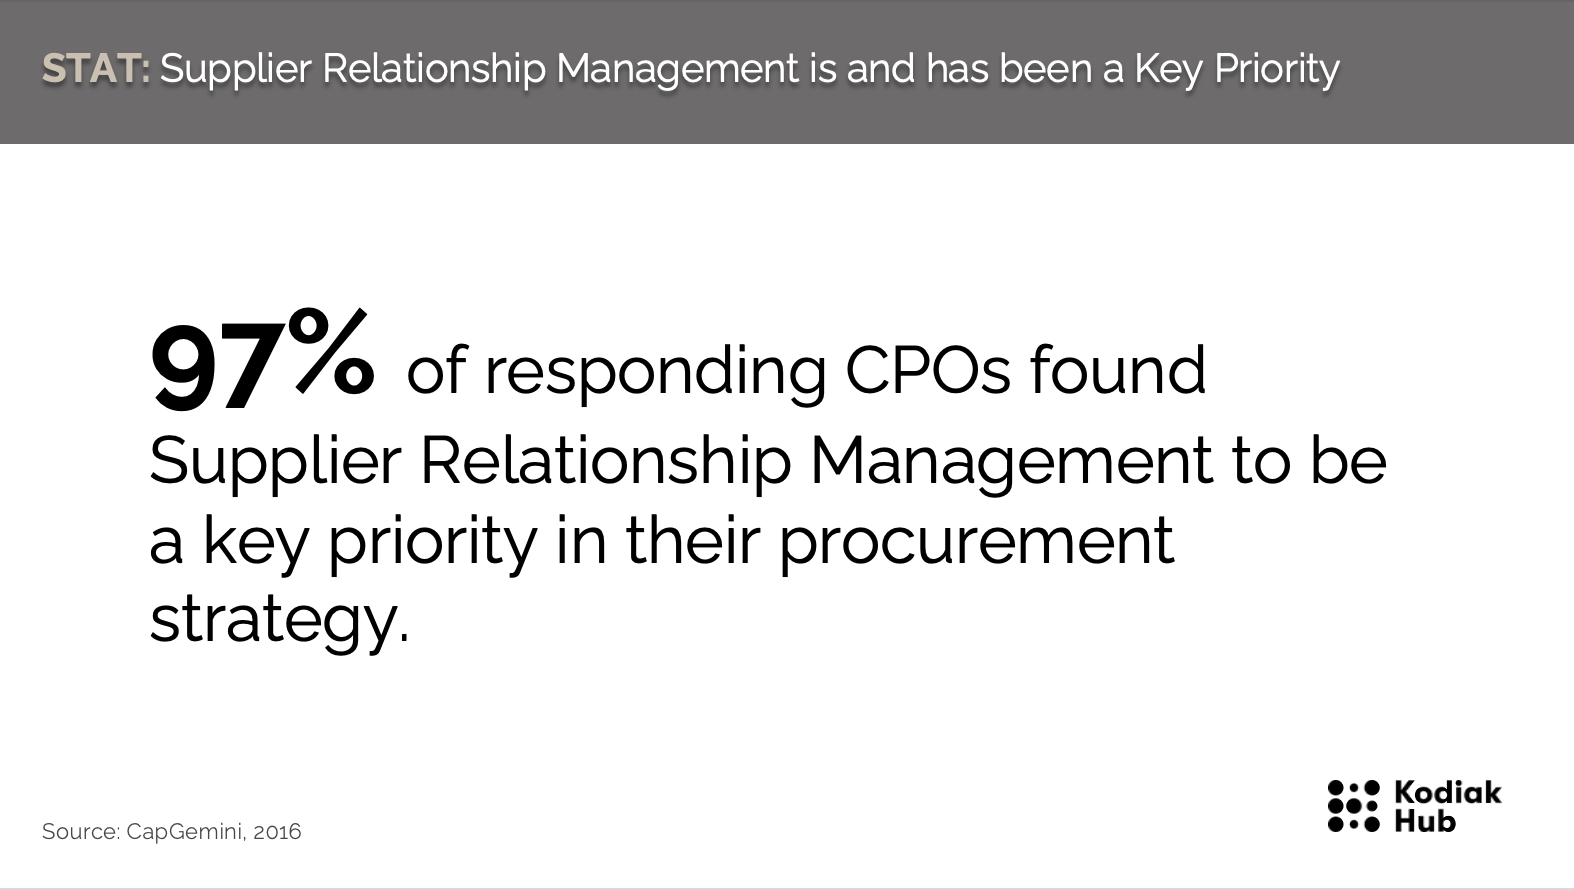 Supplier Relationship Management key priority for CPO's